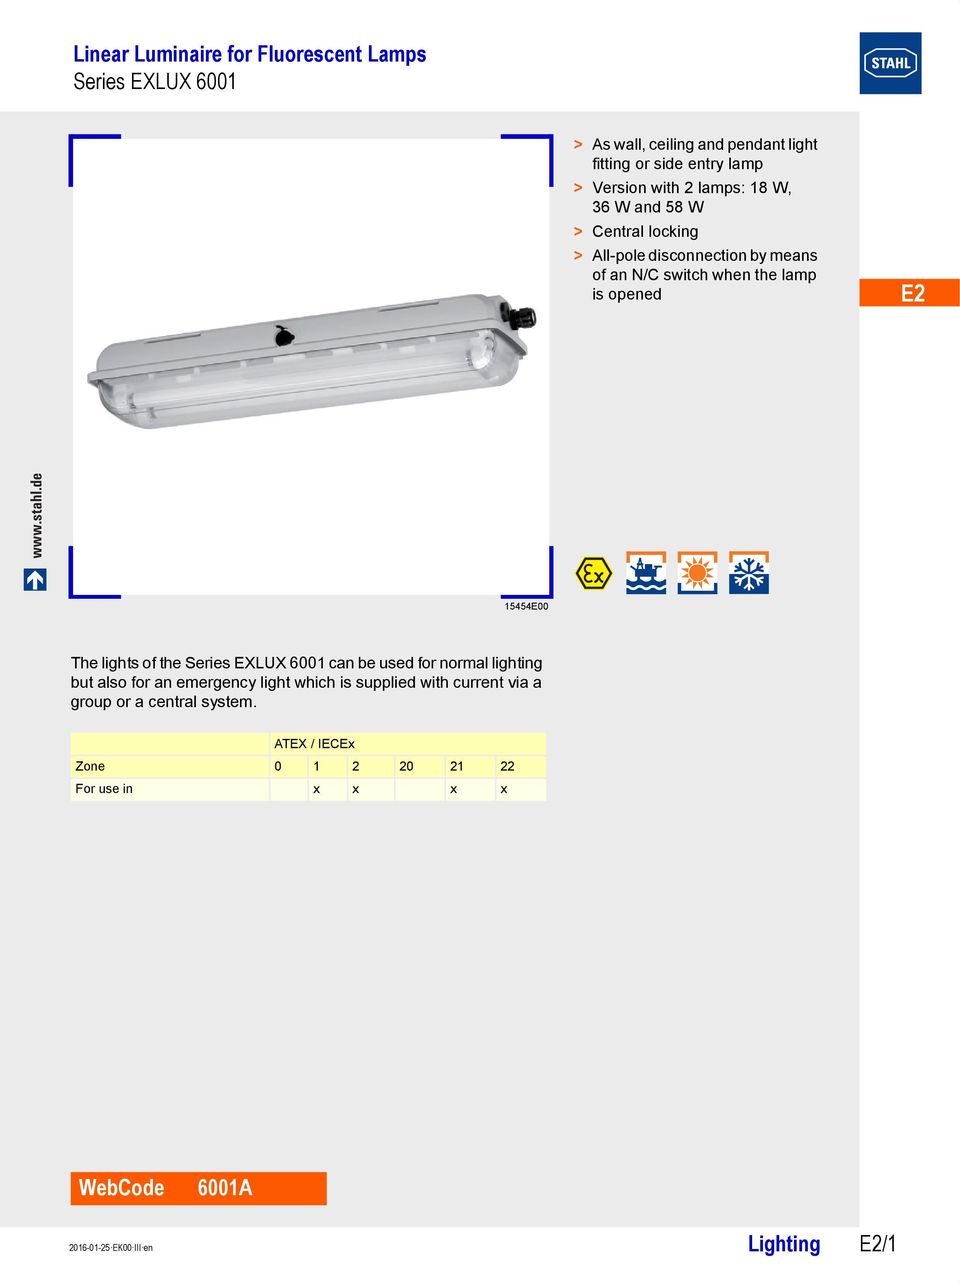 de 15454E00 The lights of the can be used for normal lighting but also for an emergency light which is supplied